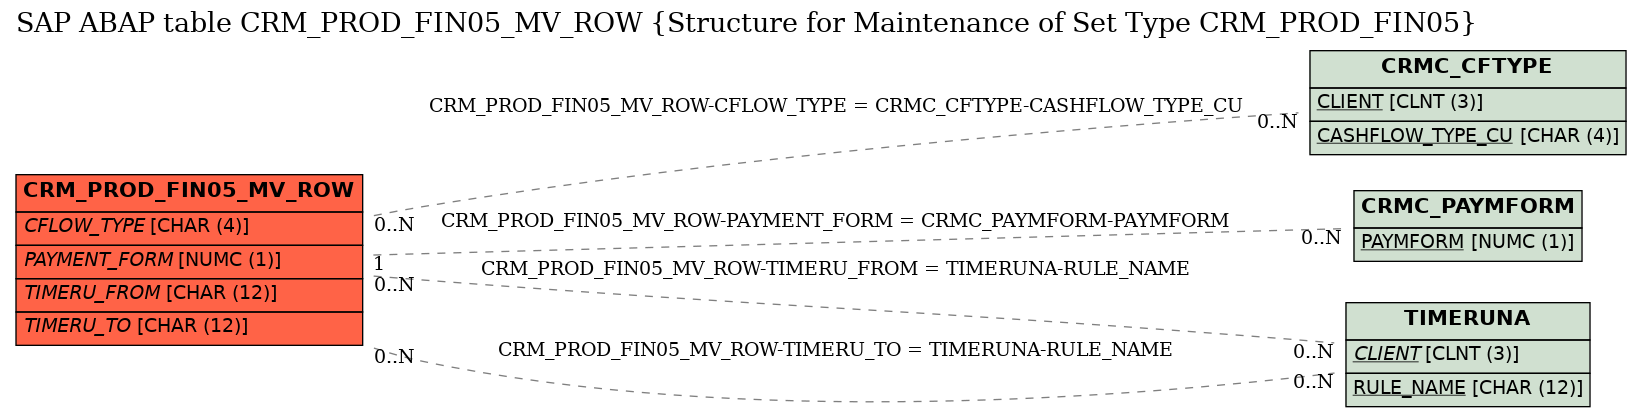 E-R Diagram for table CRM_PROD_FIN05_MV_ROW (Structure for Maintenance of Set Type CRM_PROD_FIN05)